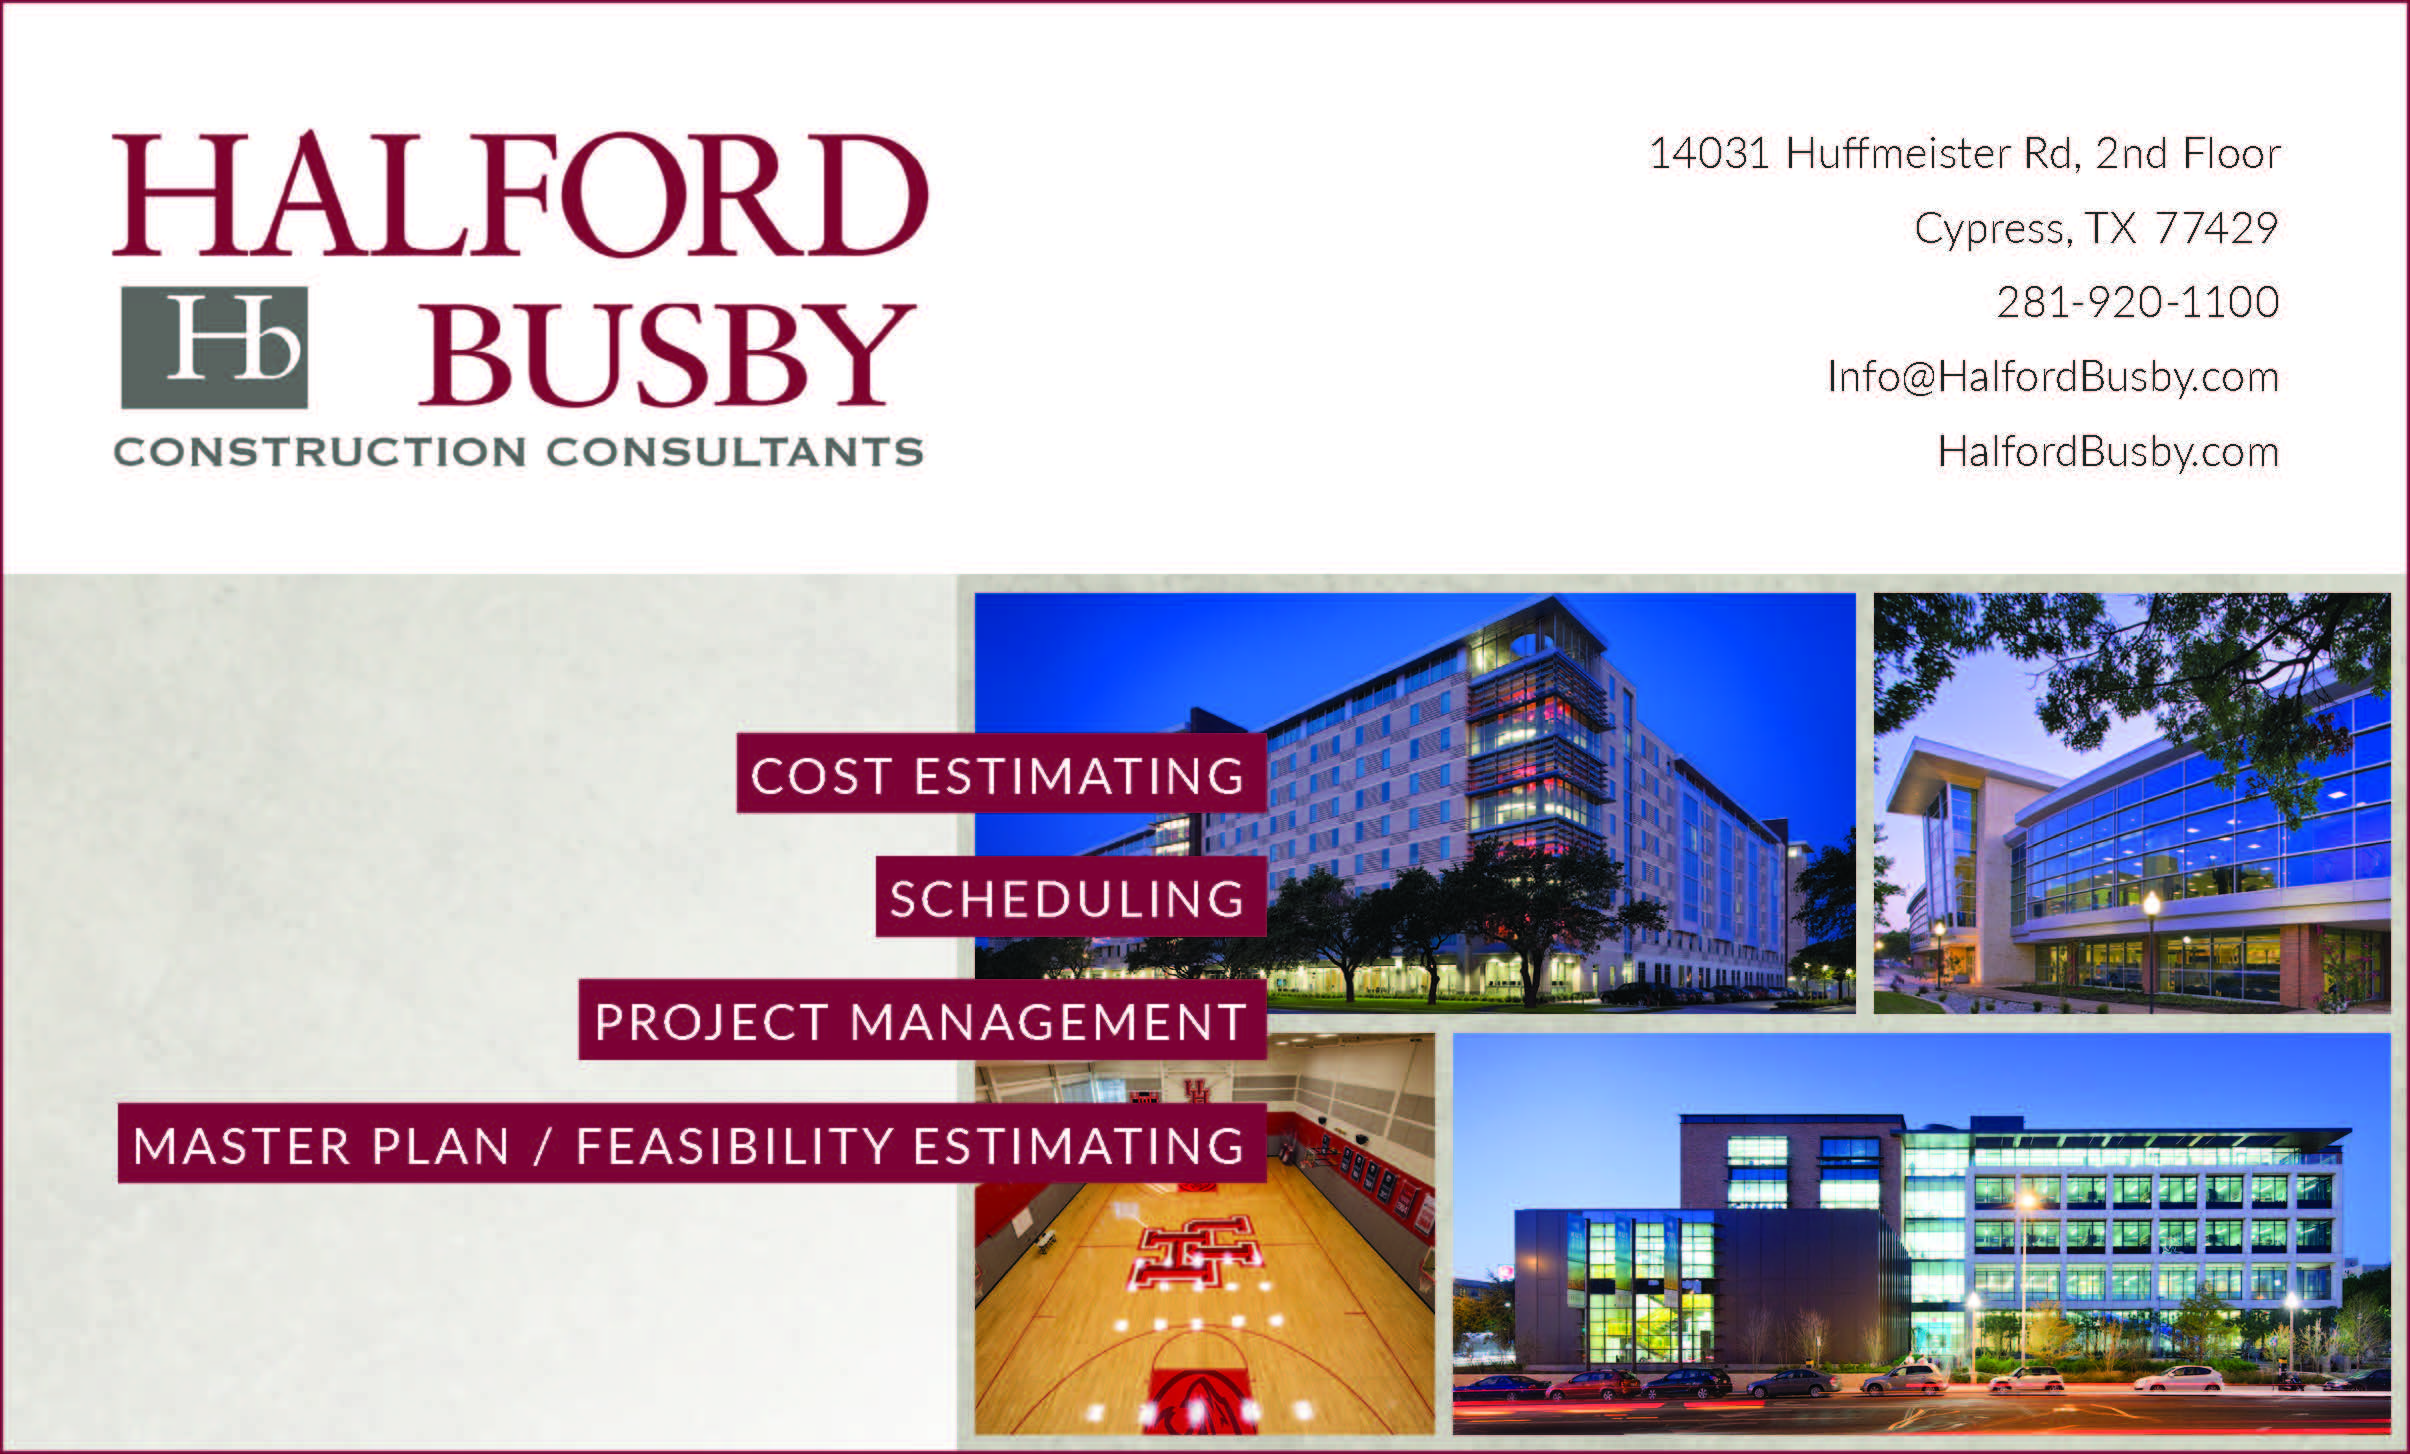 Halford Busby advertises in July-August issue of Texas Architect